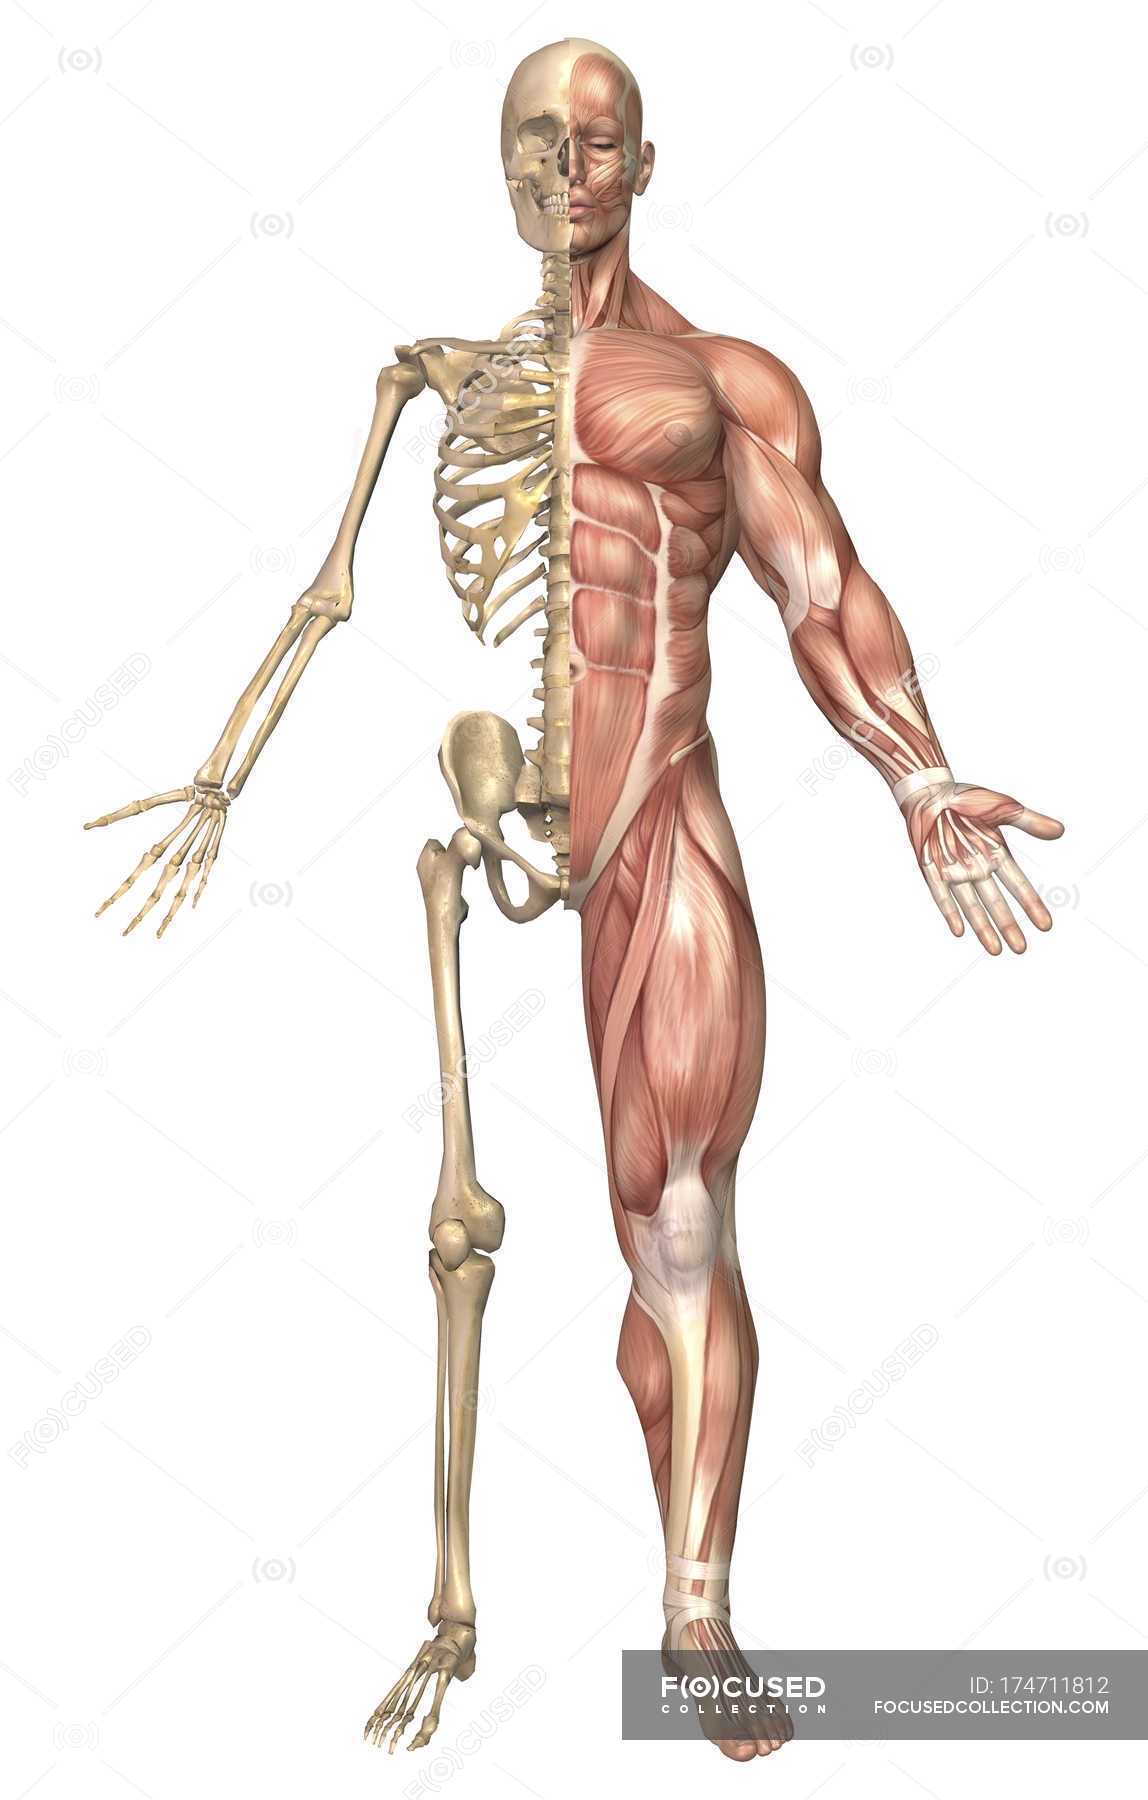 Medical illustration of the human skeleton and muscular ...